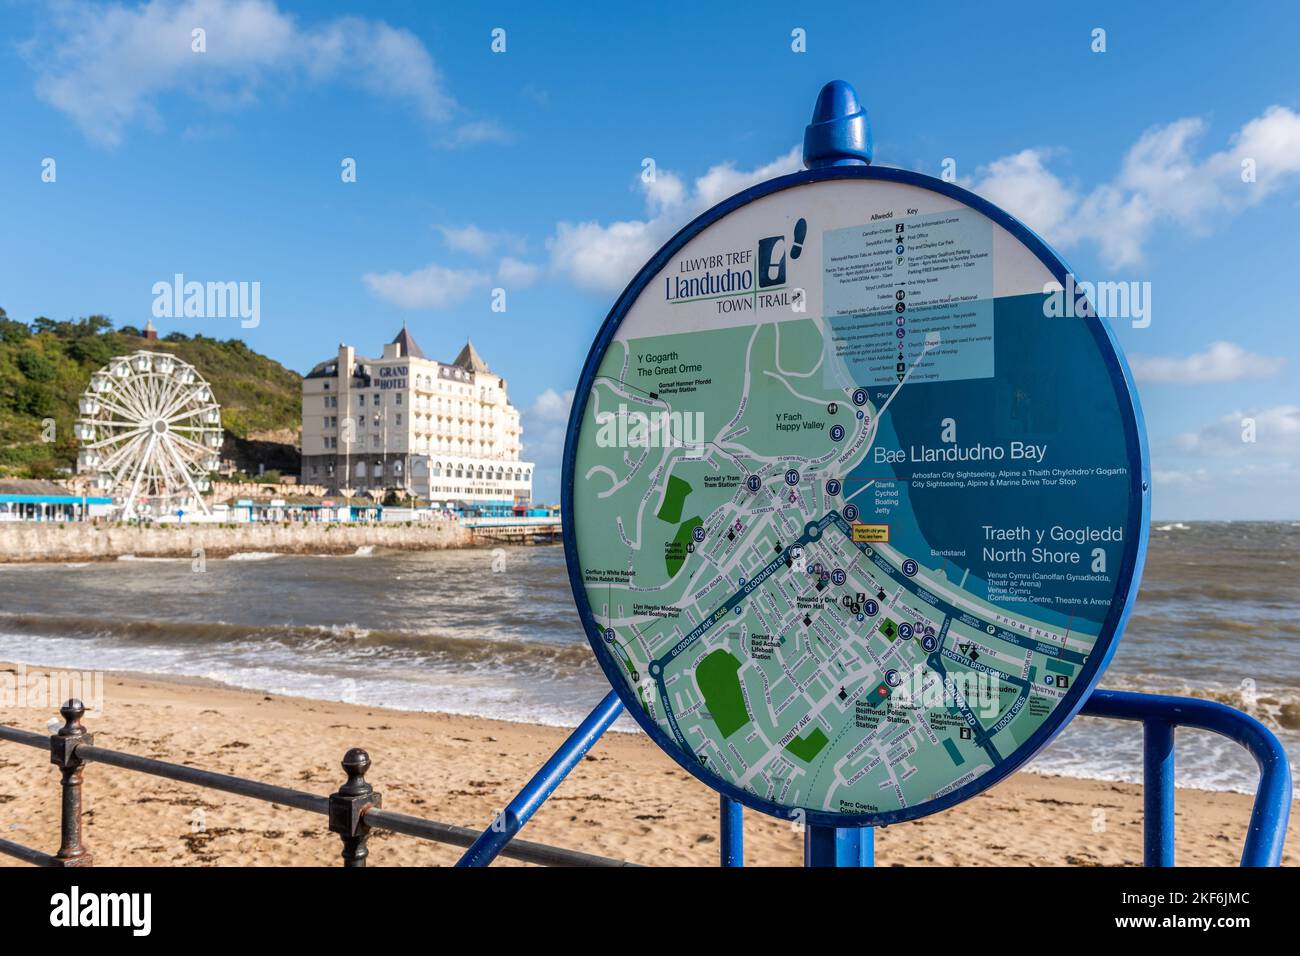 Information sign on the promenade with the Grand Hotel and ferris wheel in the background in Llandudno, North Wales, UK. Stock Photo